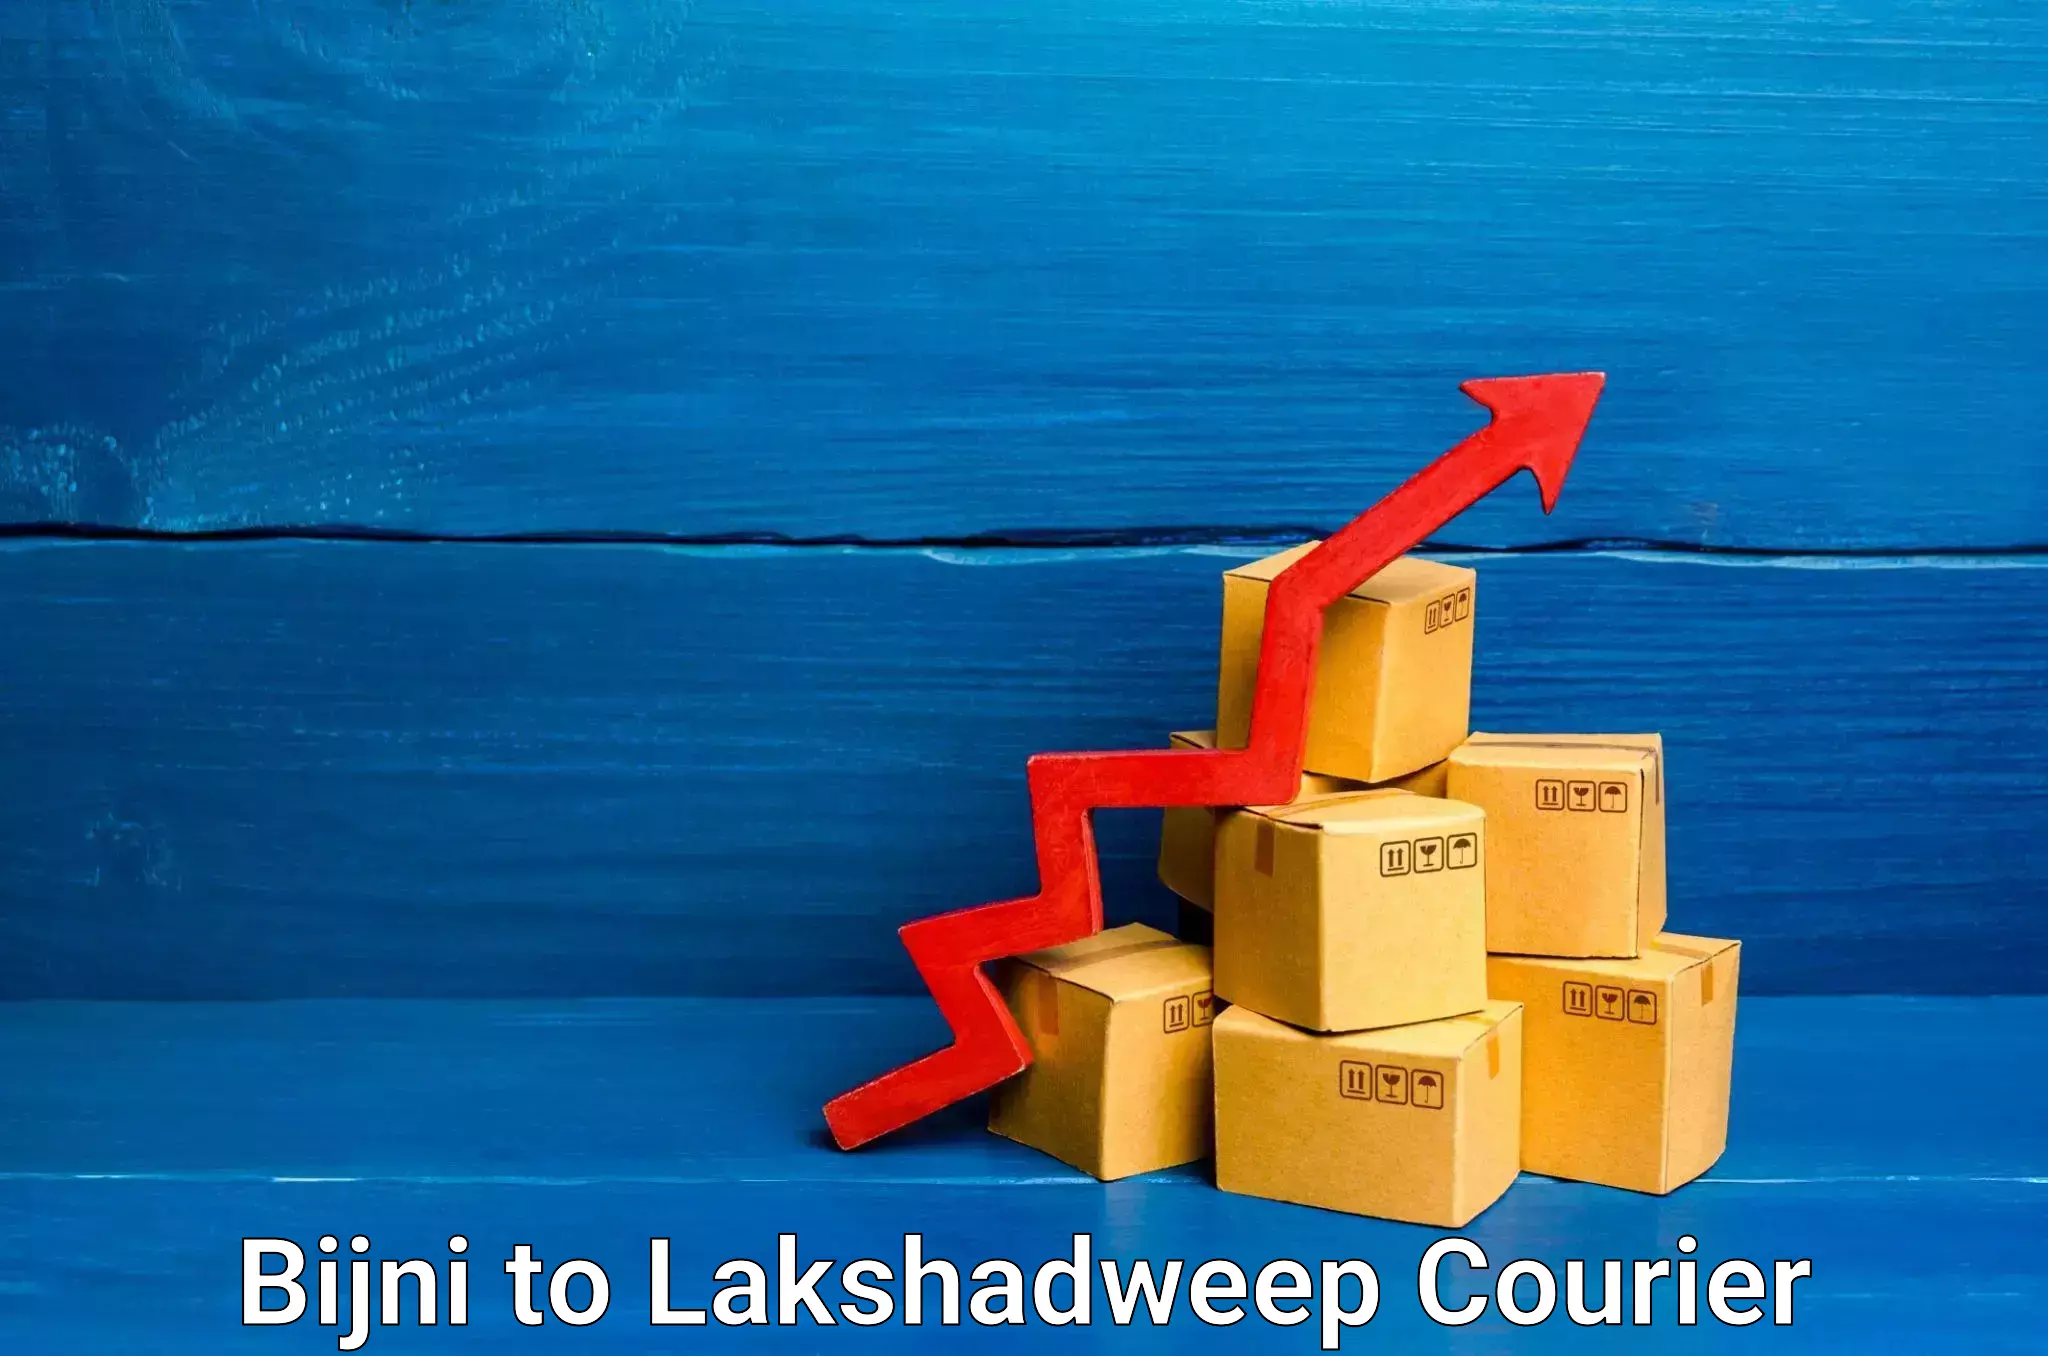 User-friendly courier app Bijni to Lakshadweep